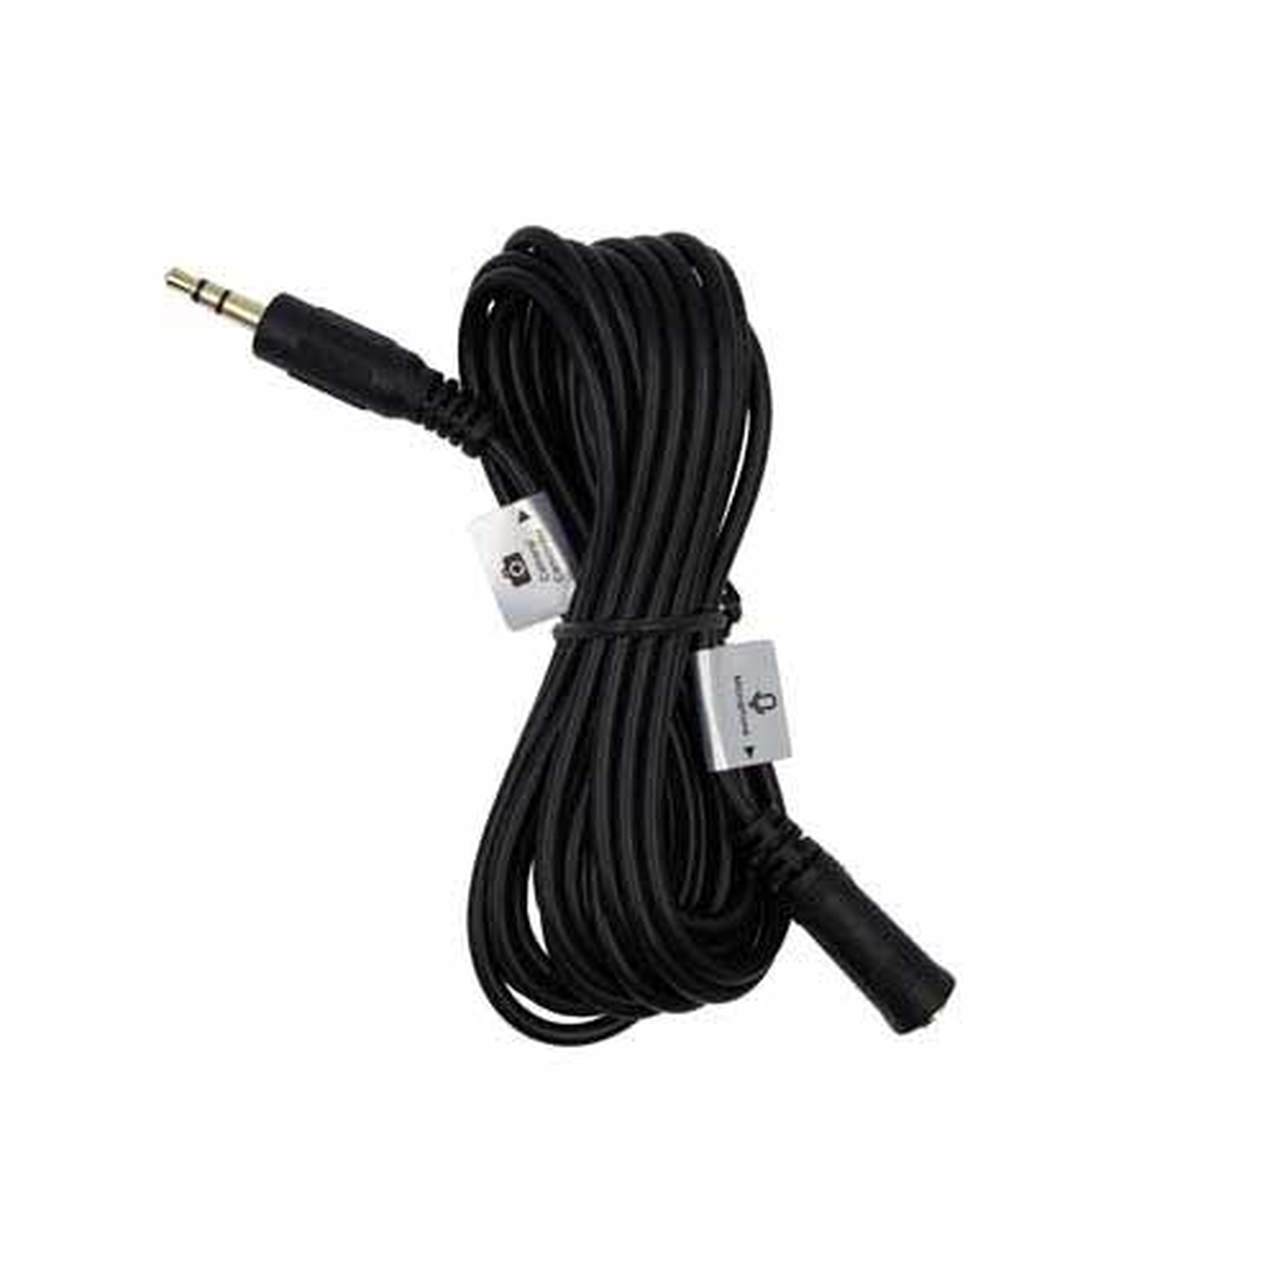 Promaster 8060 3.5mm Male-3.5mm Female 10FT straight extension cable